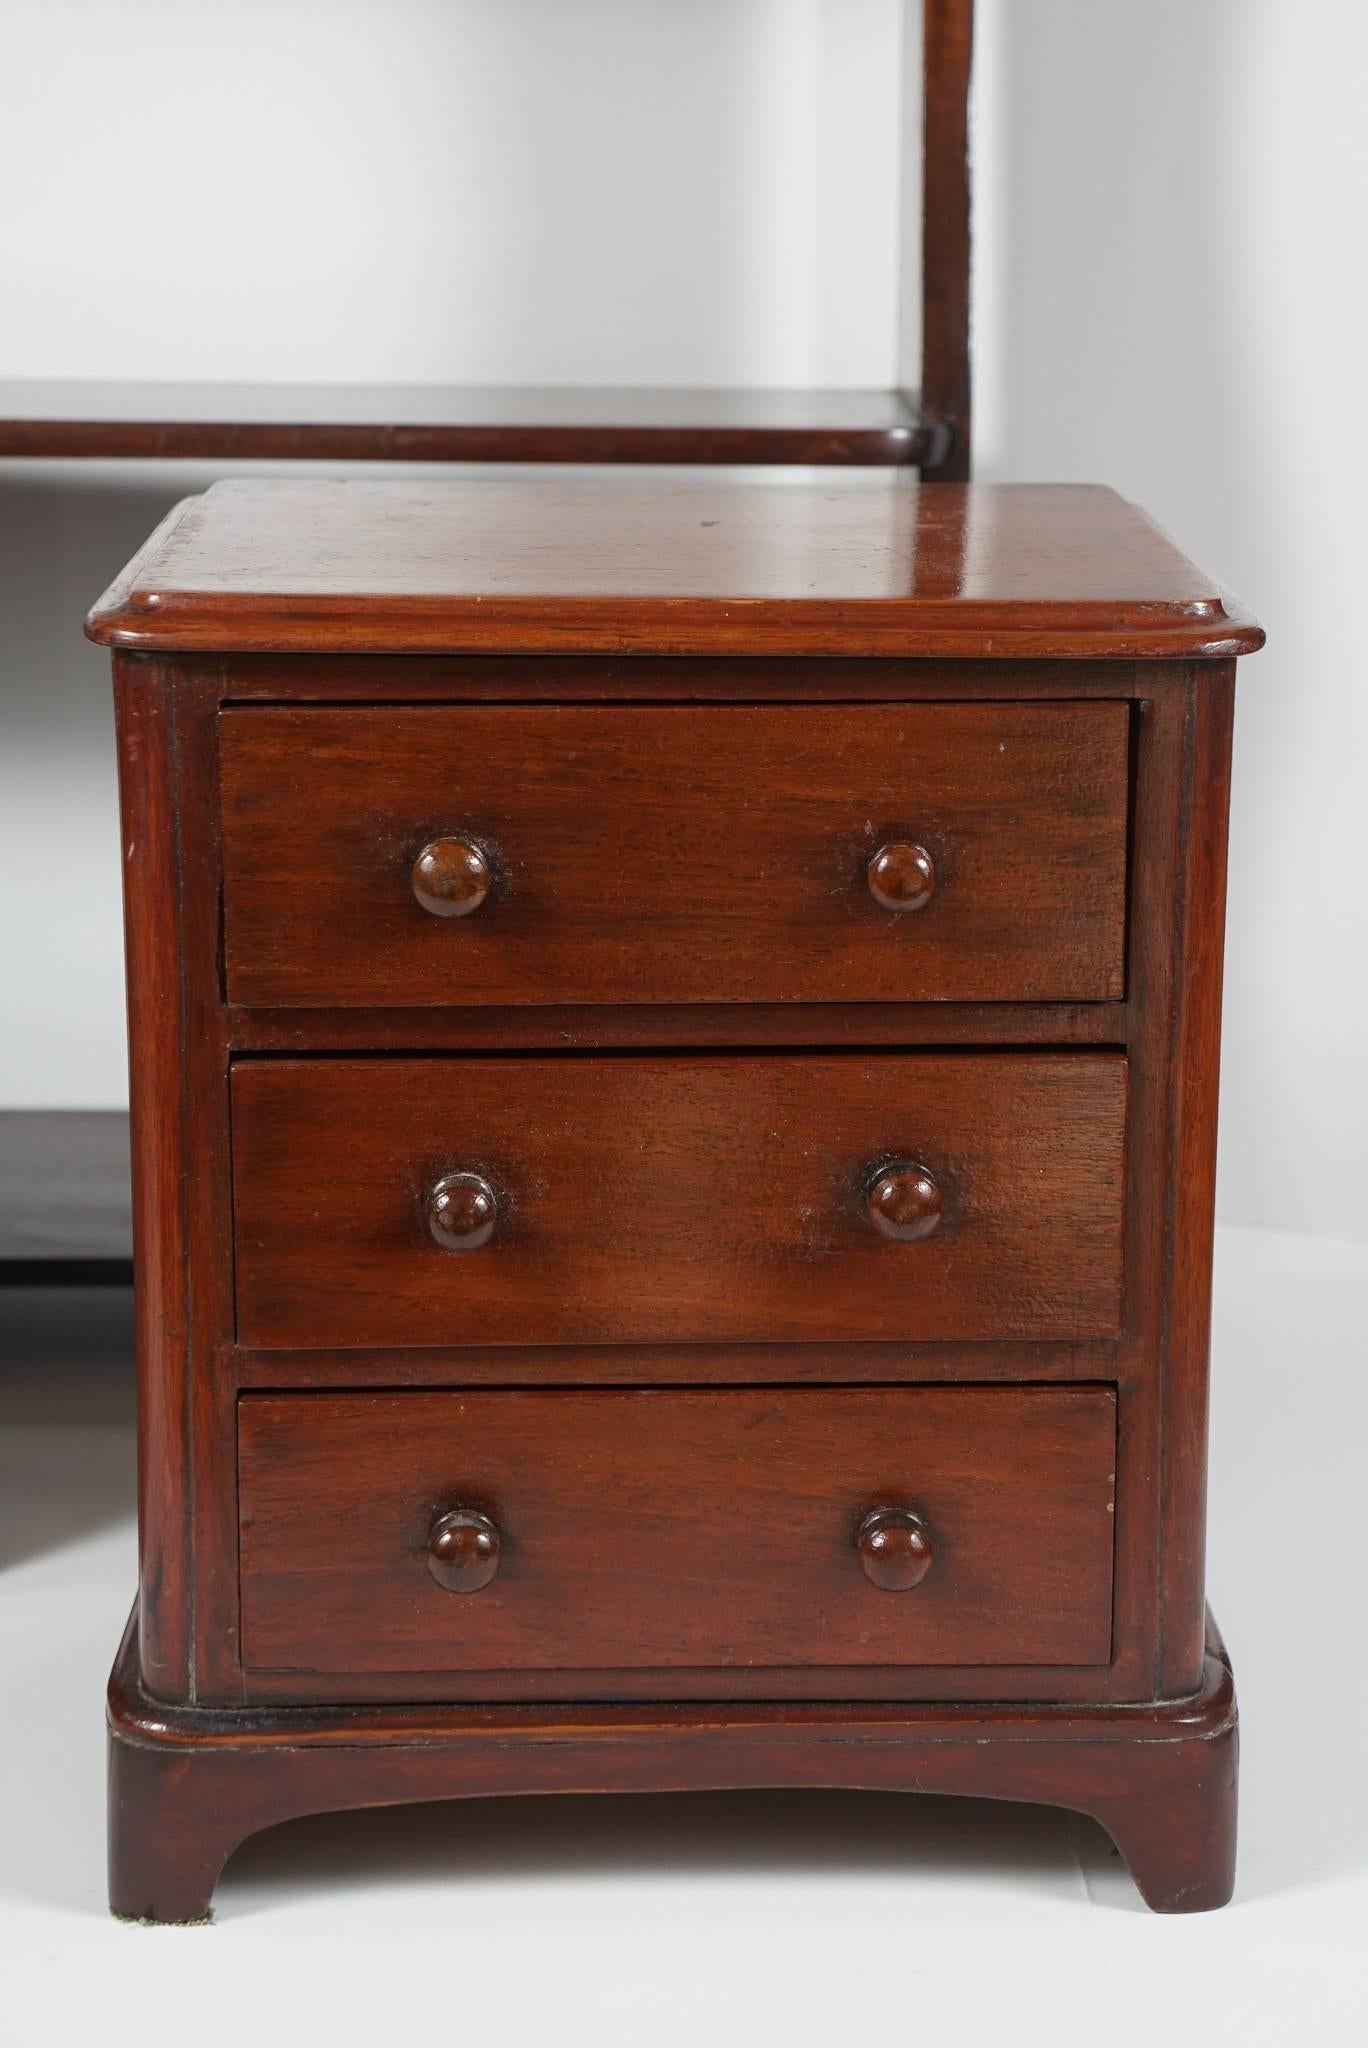 British Collection of Regency Mahogany Items from the Estate of Paul & Bunny Mellon